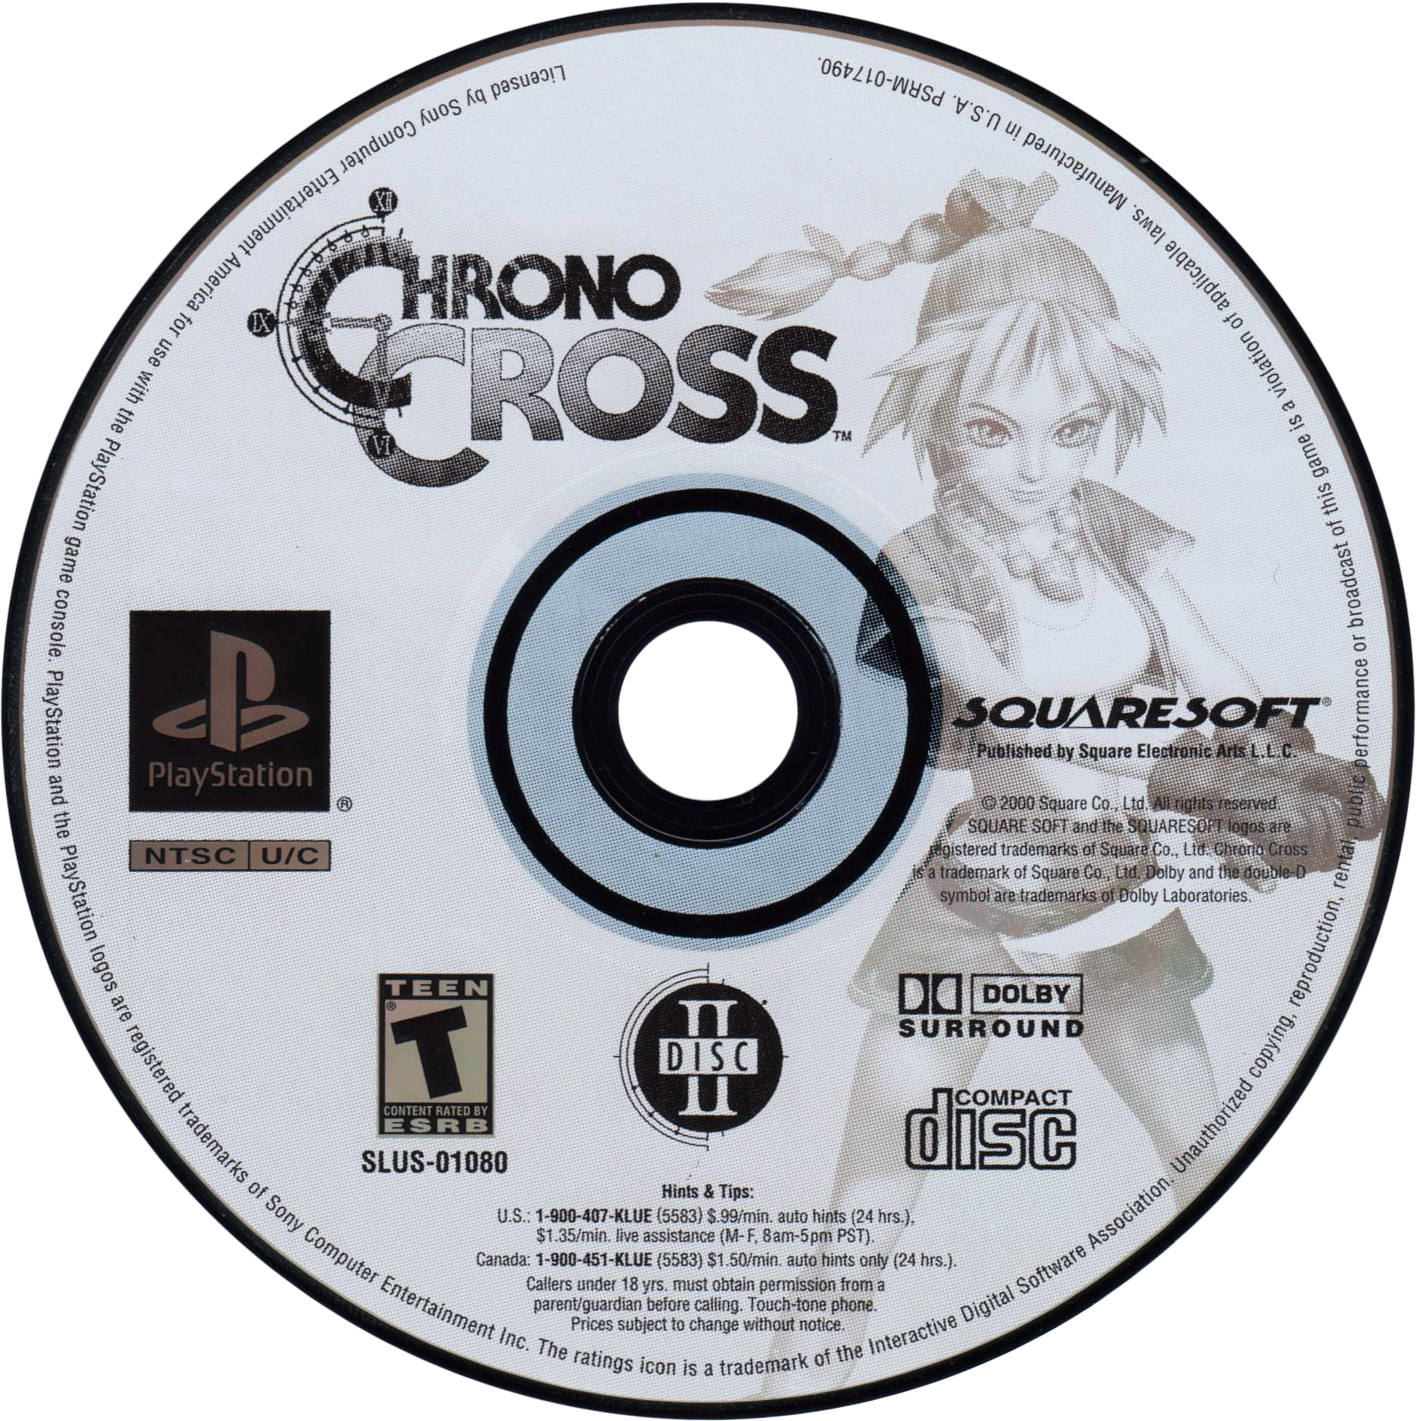 Chrono Cross: The Radical Dreamers Edition Details - LaunchBox Games  Database